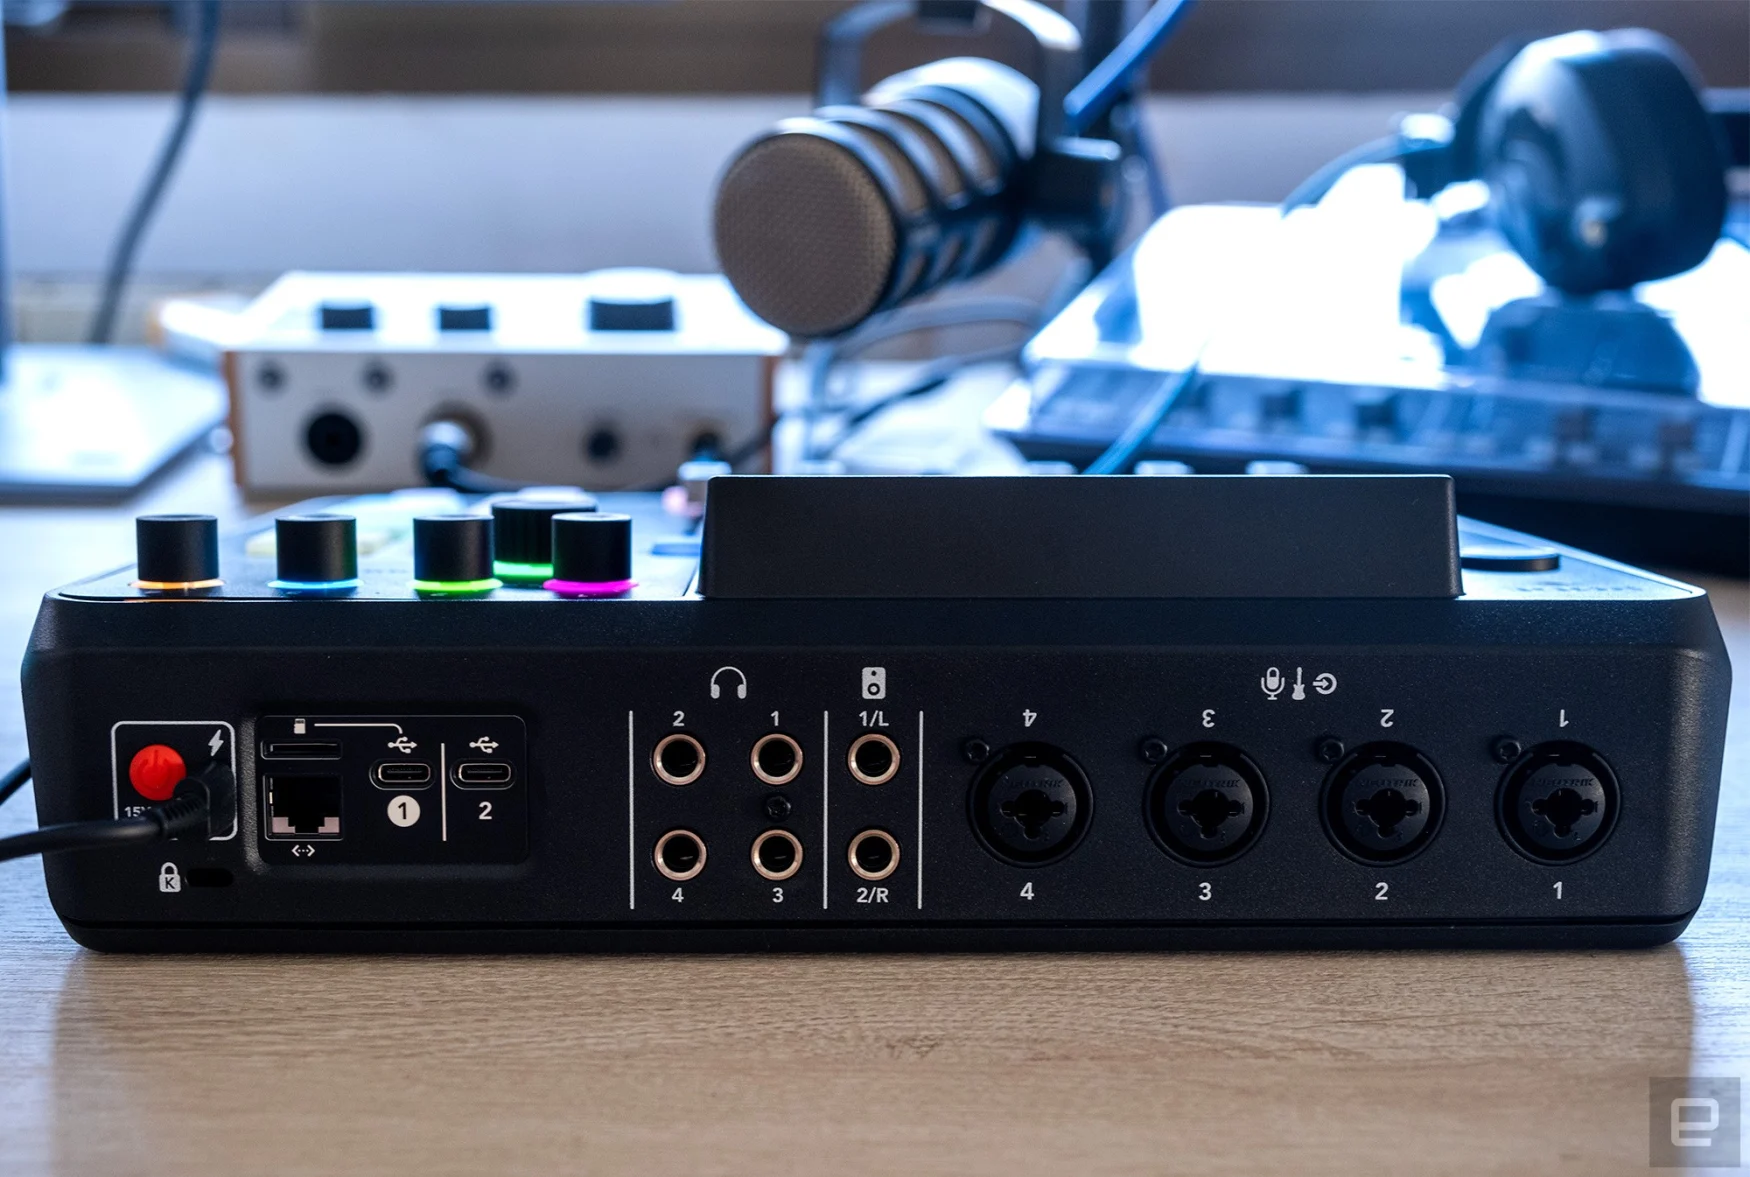 A rear view of the new Rodecaster Pro II mixing desk from Rode.